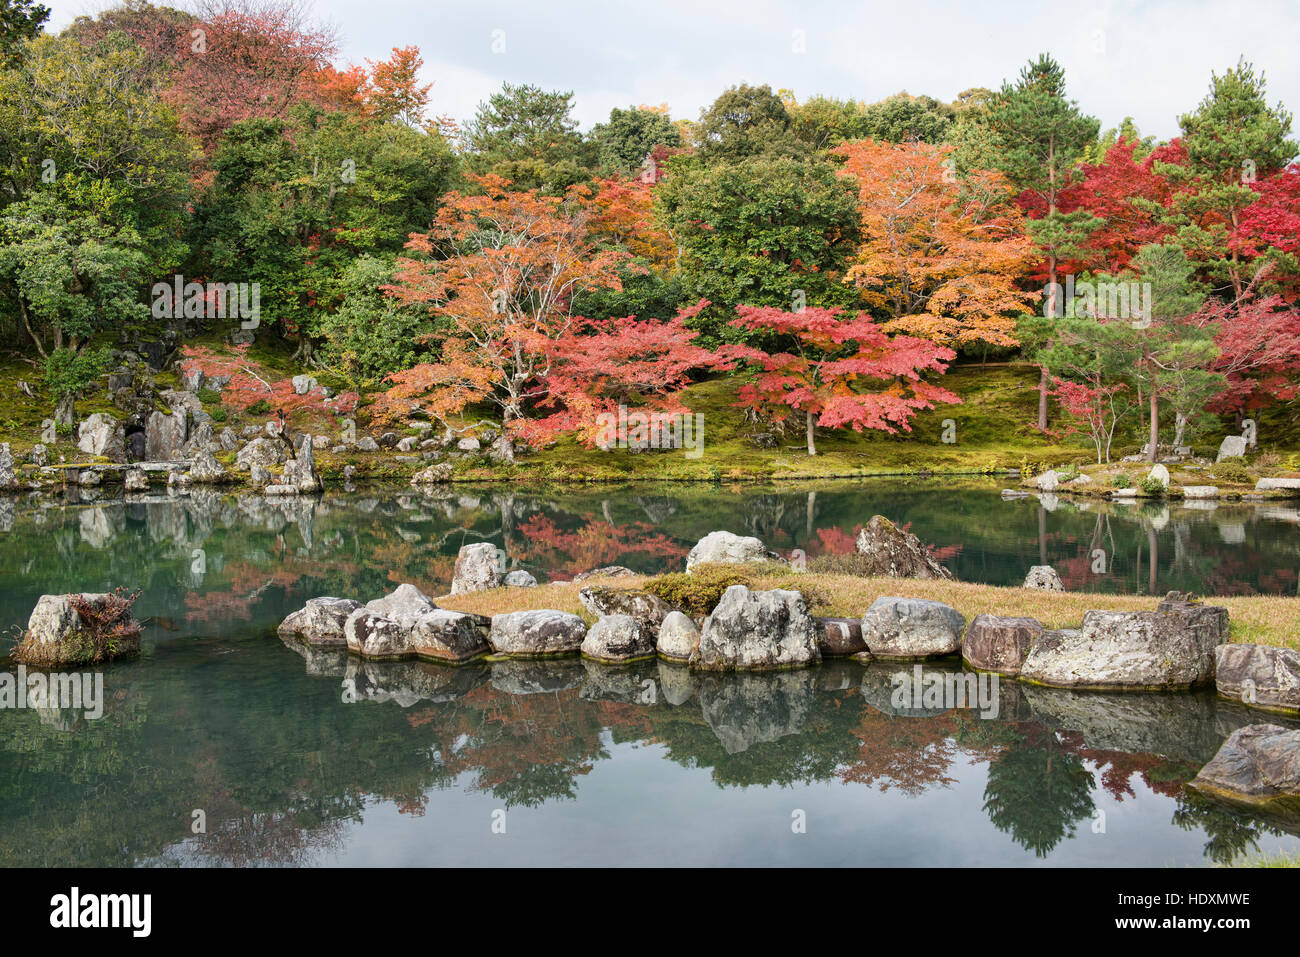 Autumn leaves in full color in the Sogen garden at Tenryu-ji Temple, Kyoto, Japan Stock Photo